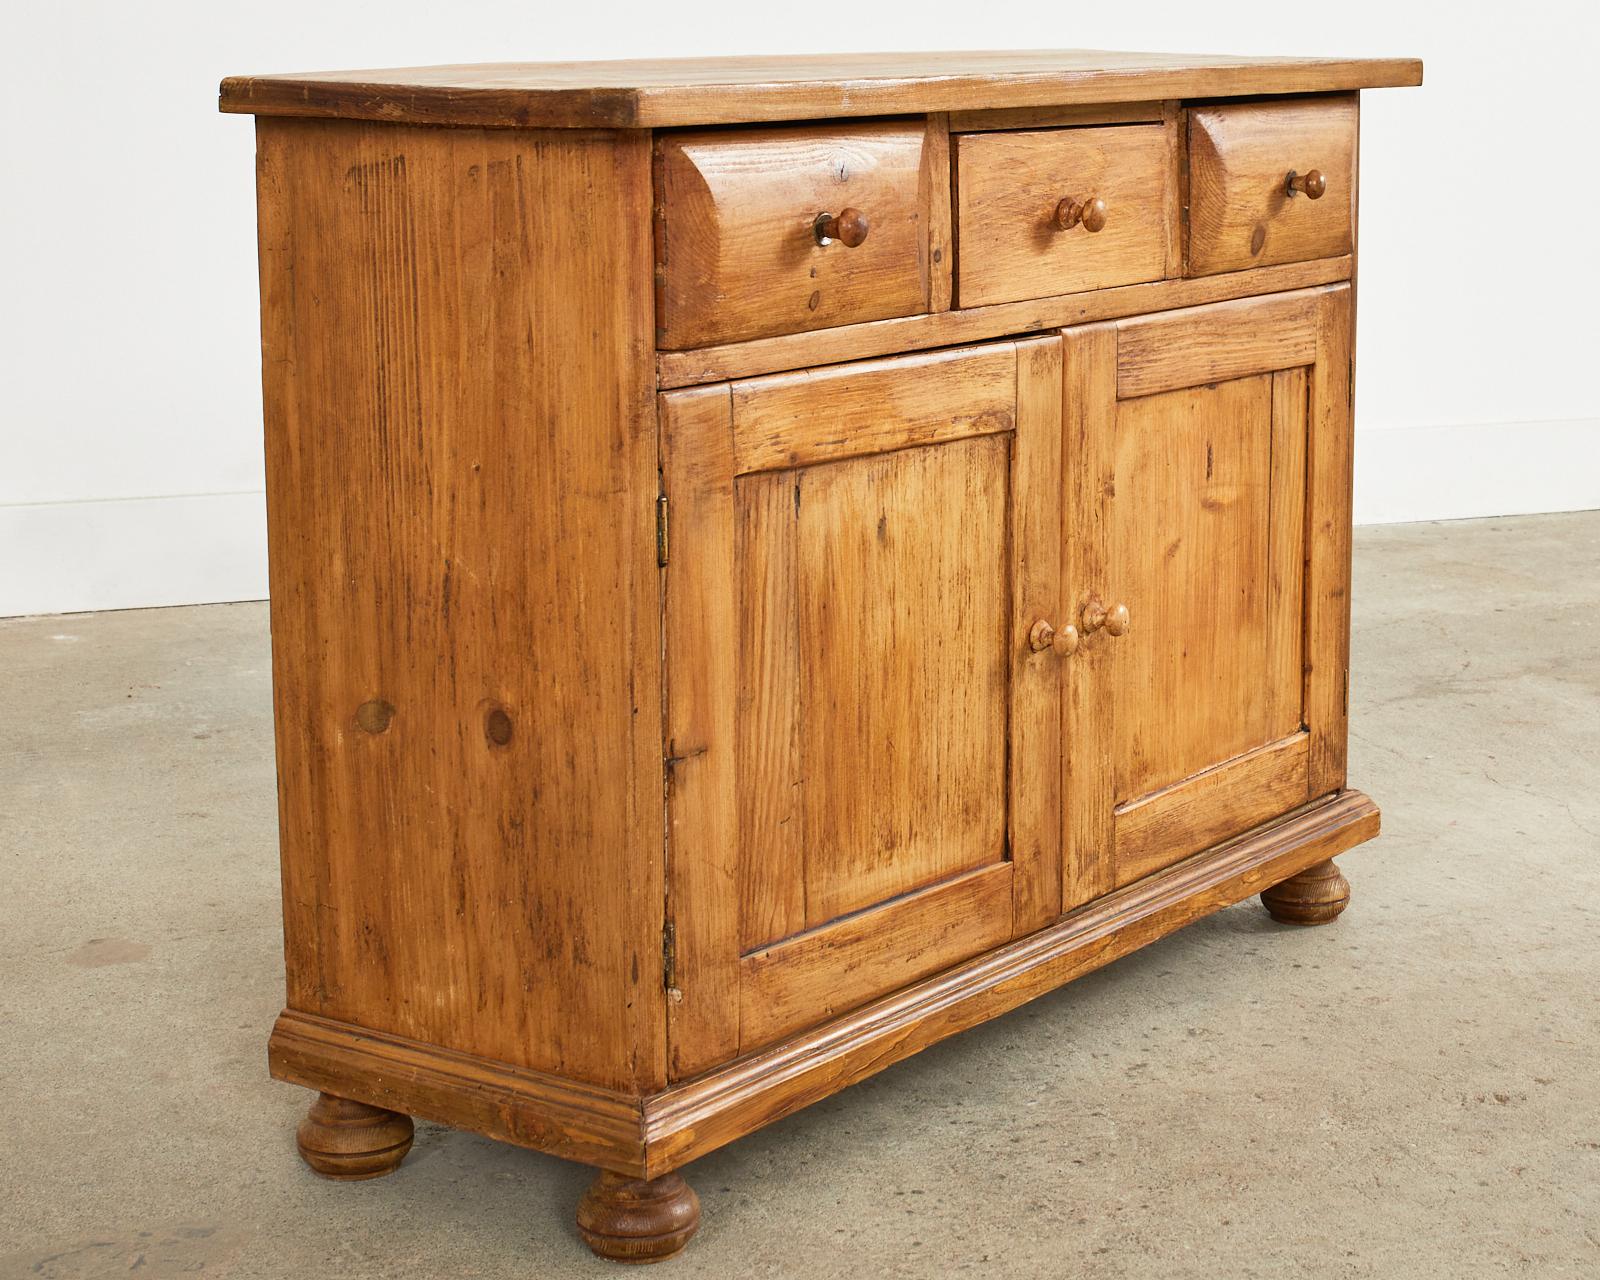 Hand-Crafted Country English Farmhouse Pine Buffet Server Cupboard